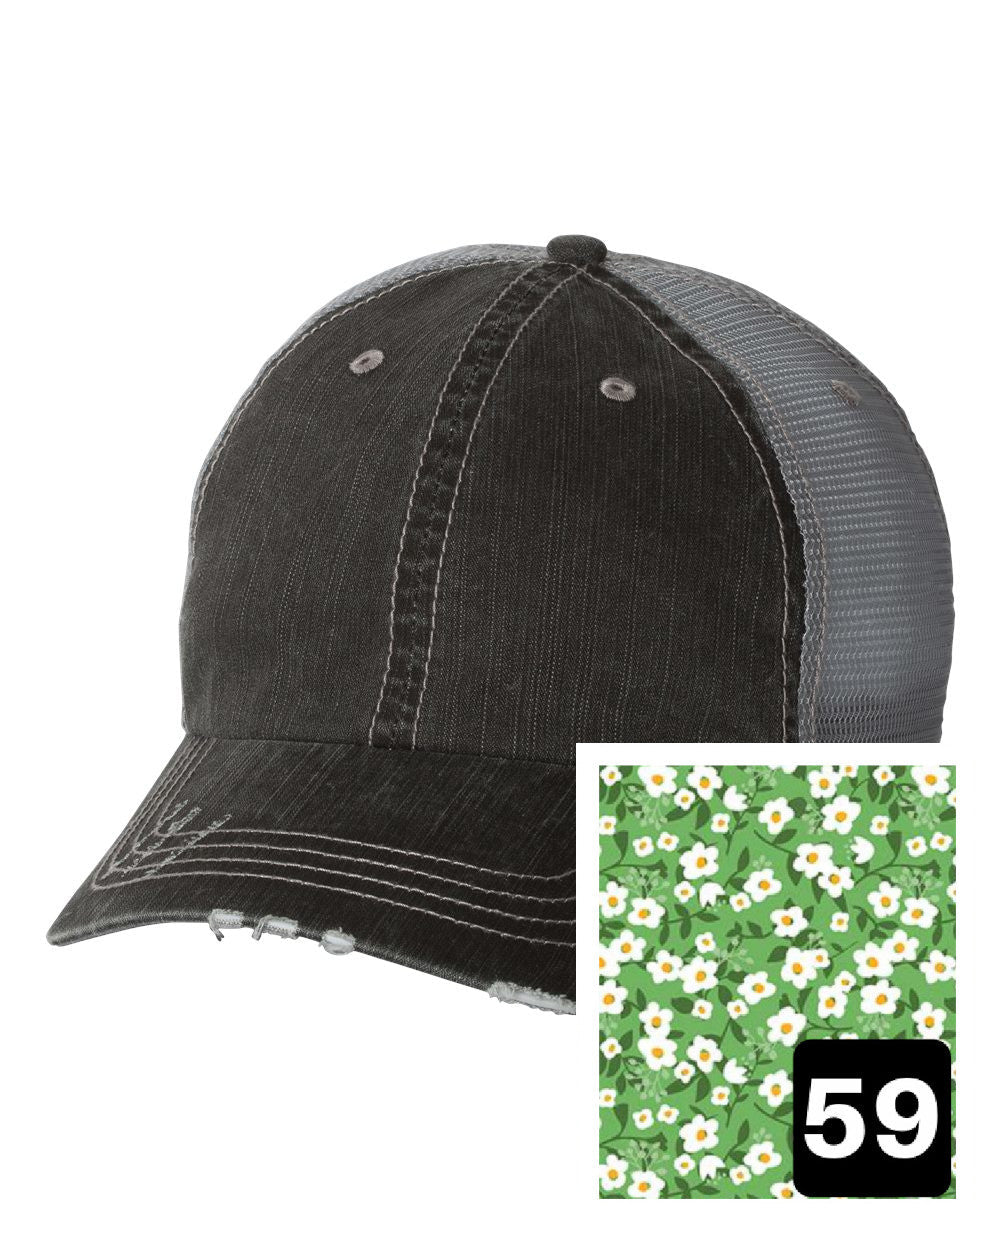 gray distressed trucker hat with white floral on red fabric state of Connecticut